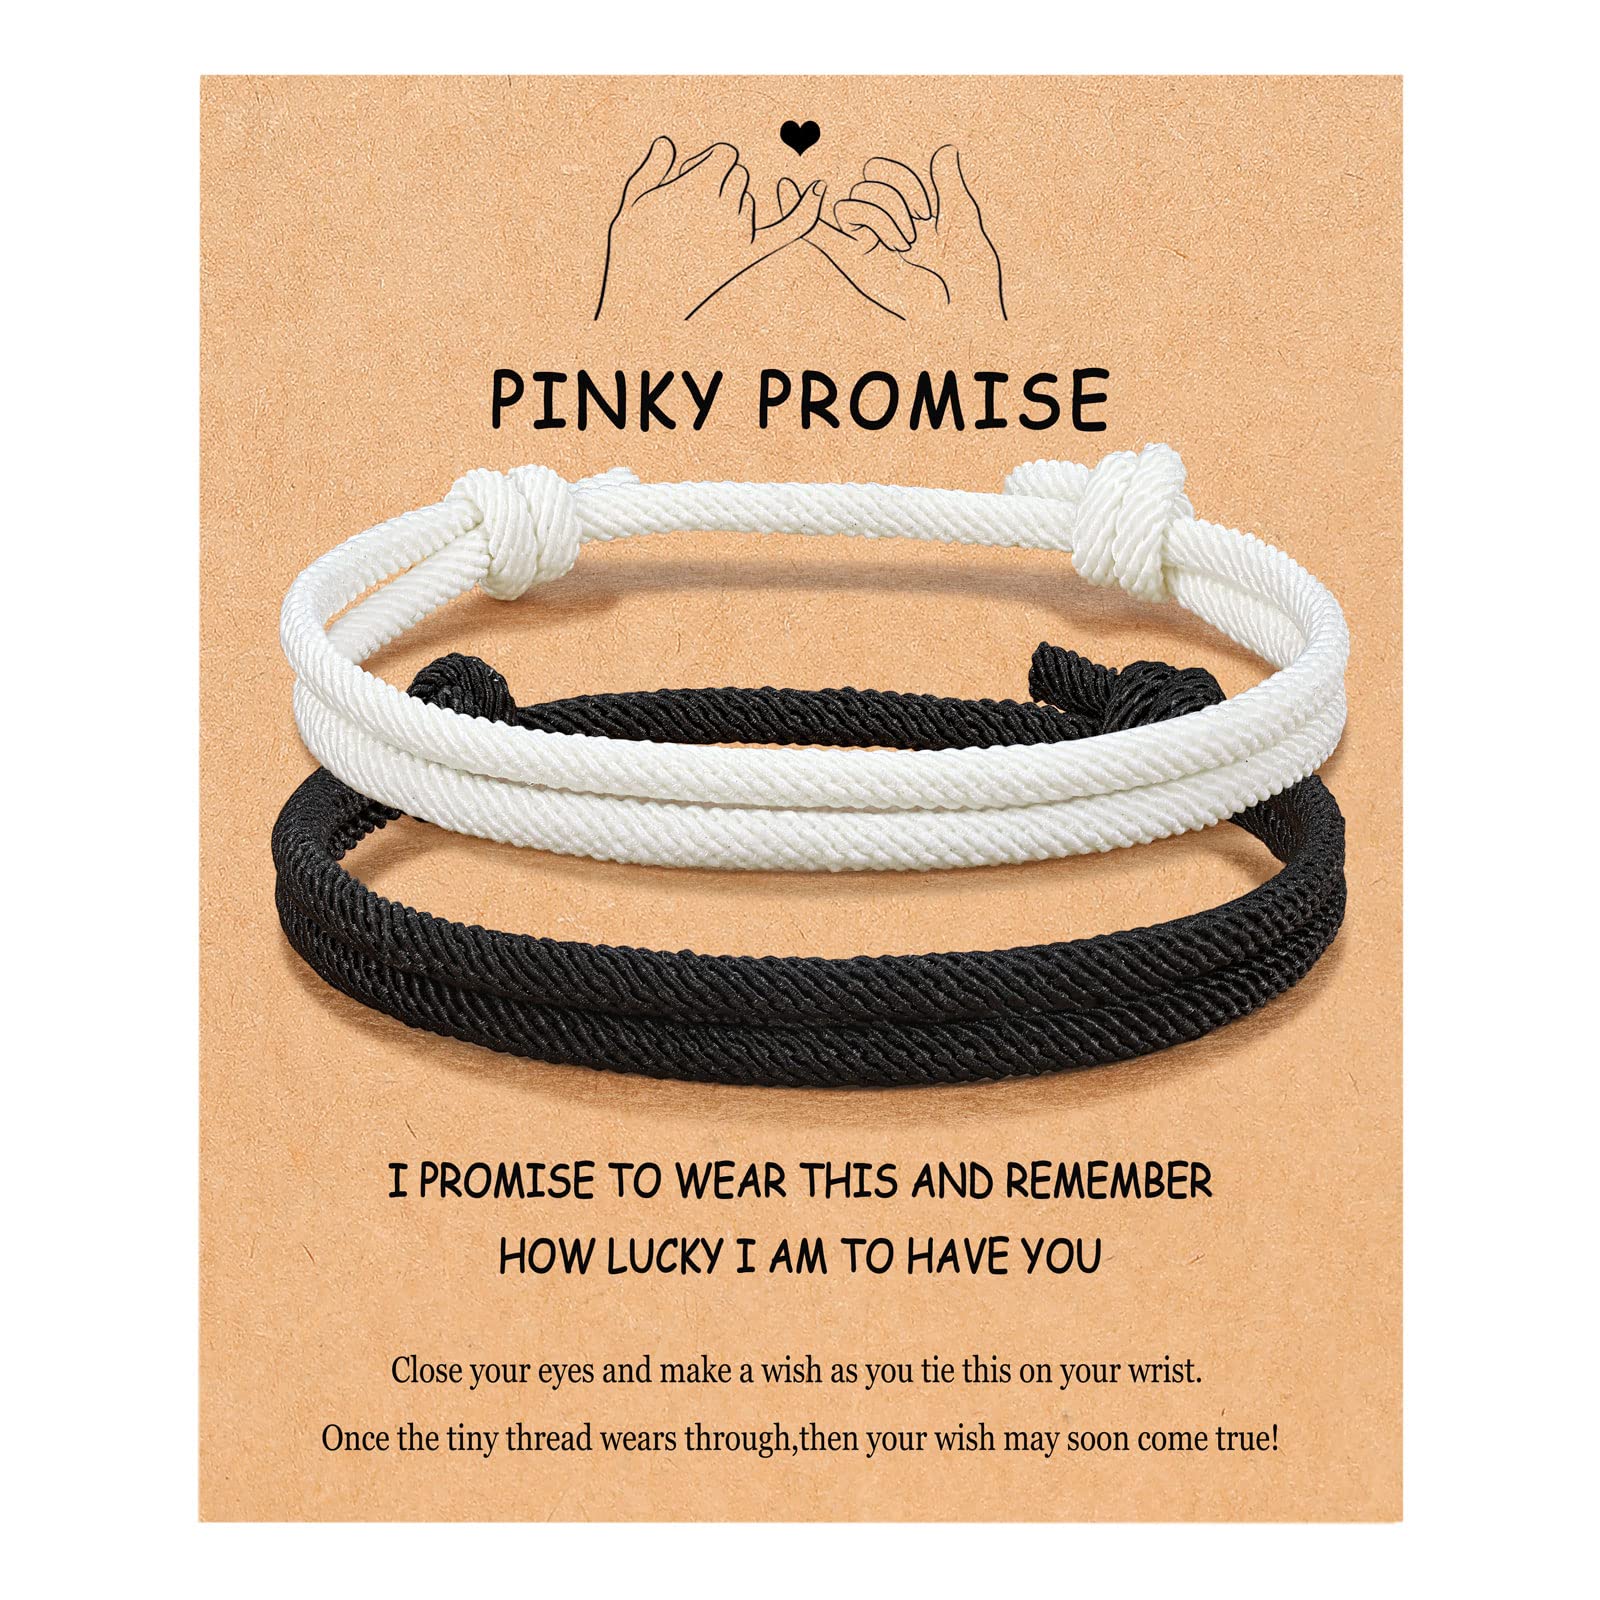 UNGENT THEM Couples Bracelets To My Men, Boyfriend, Girlfriend, My Love, Soulmate, Fiance - Anniversary Valentines Day Birthday Christmas Gift for Him and Her